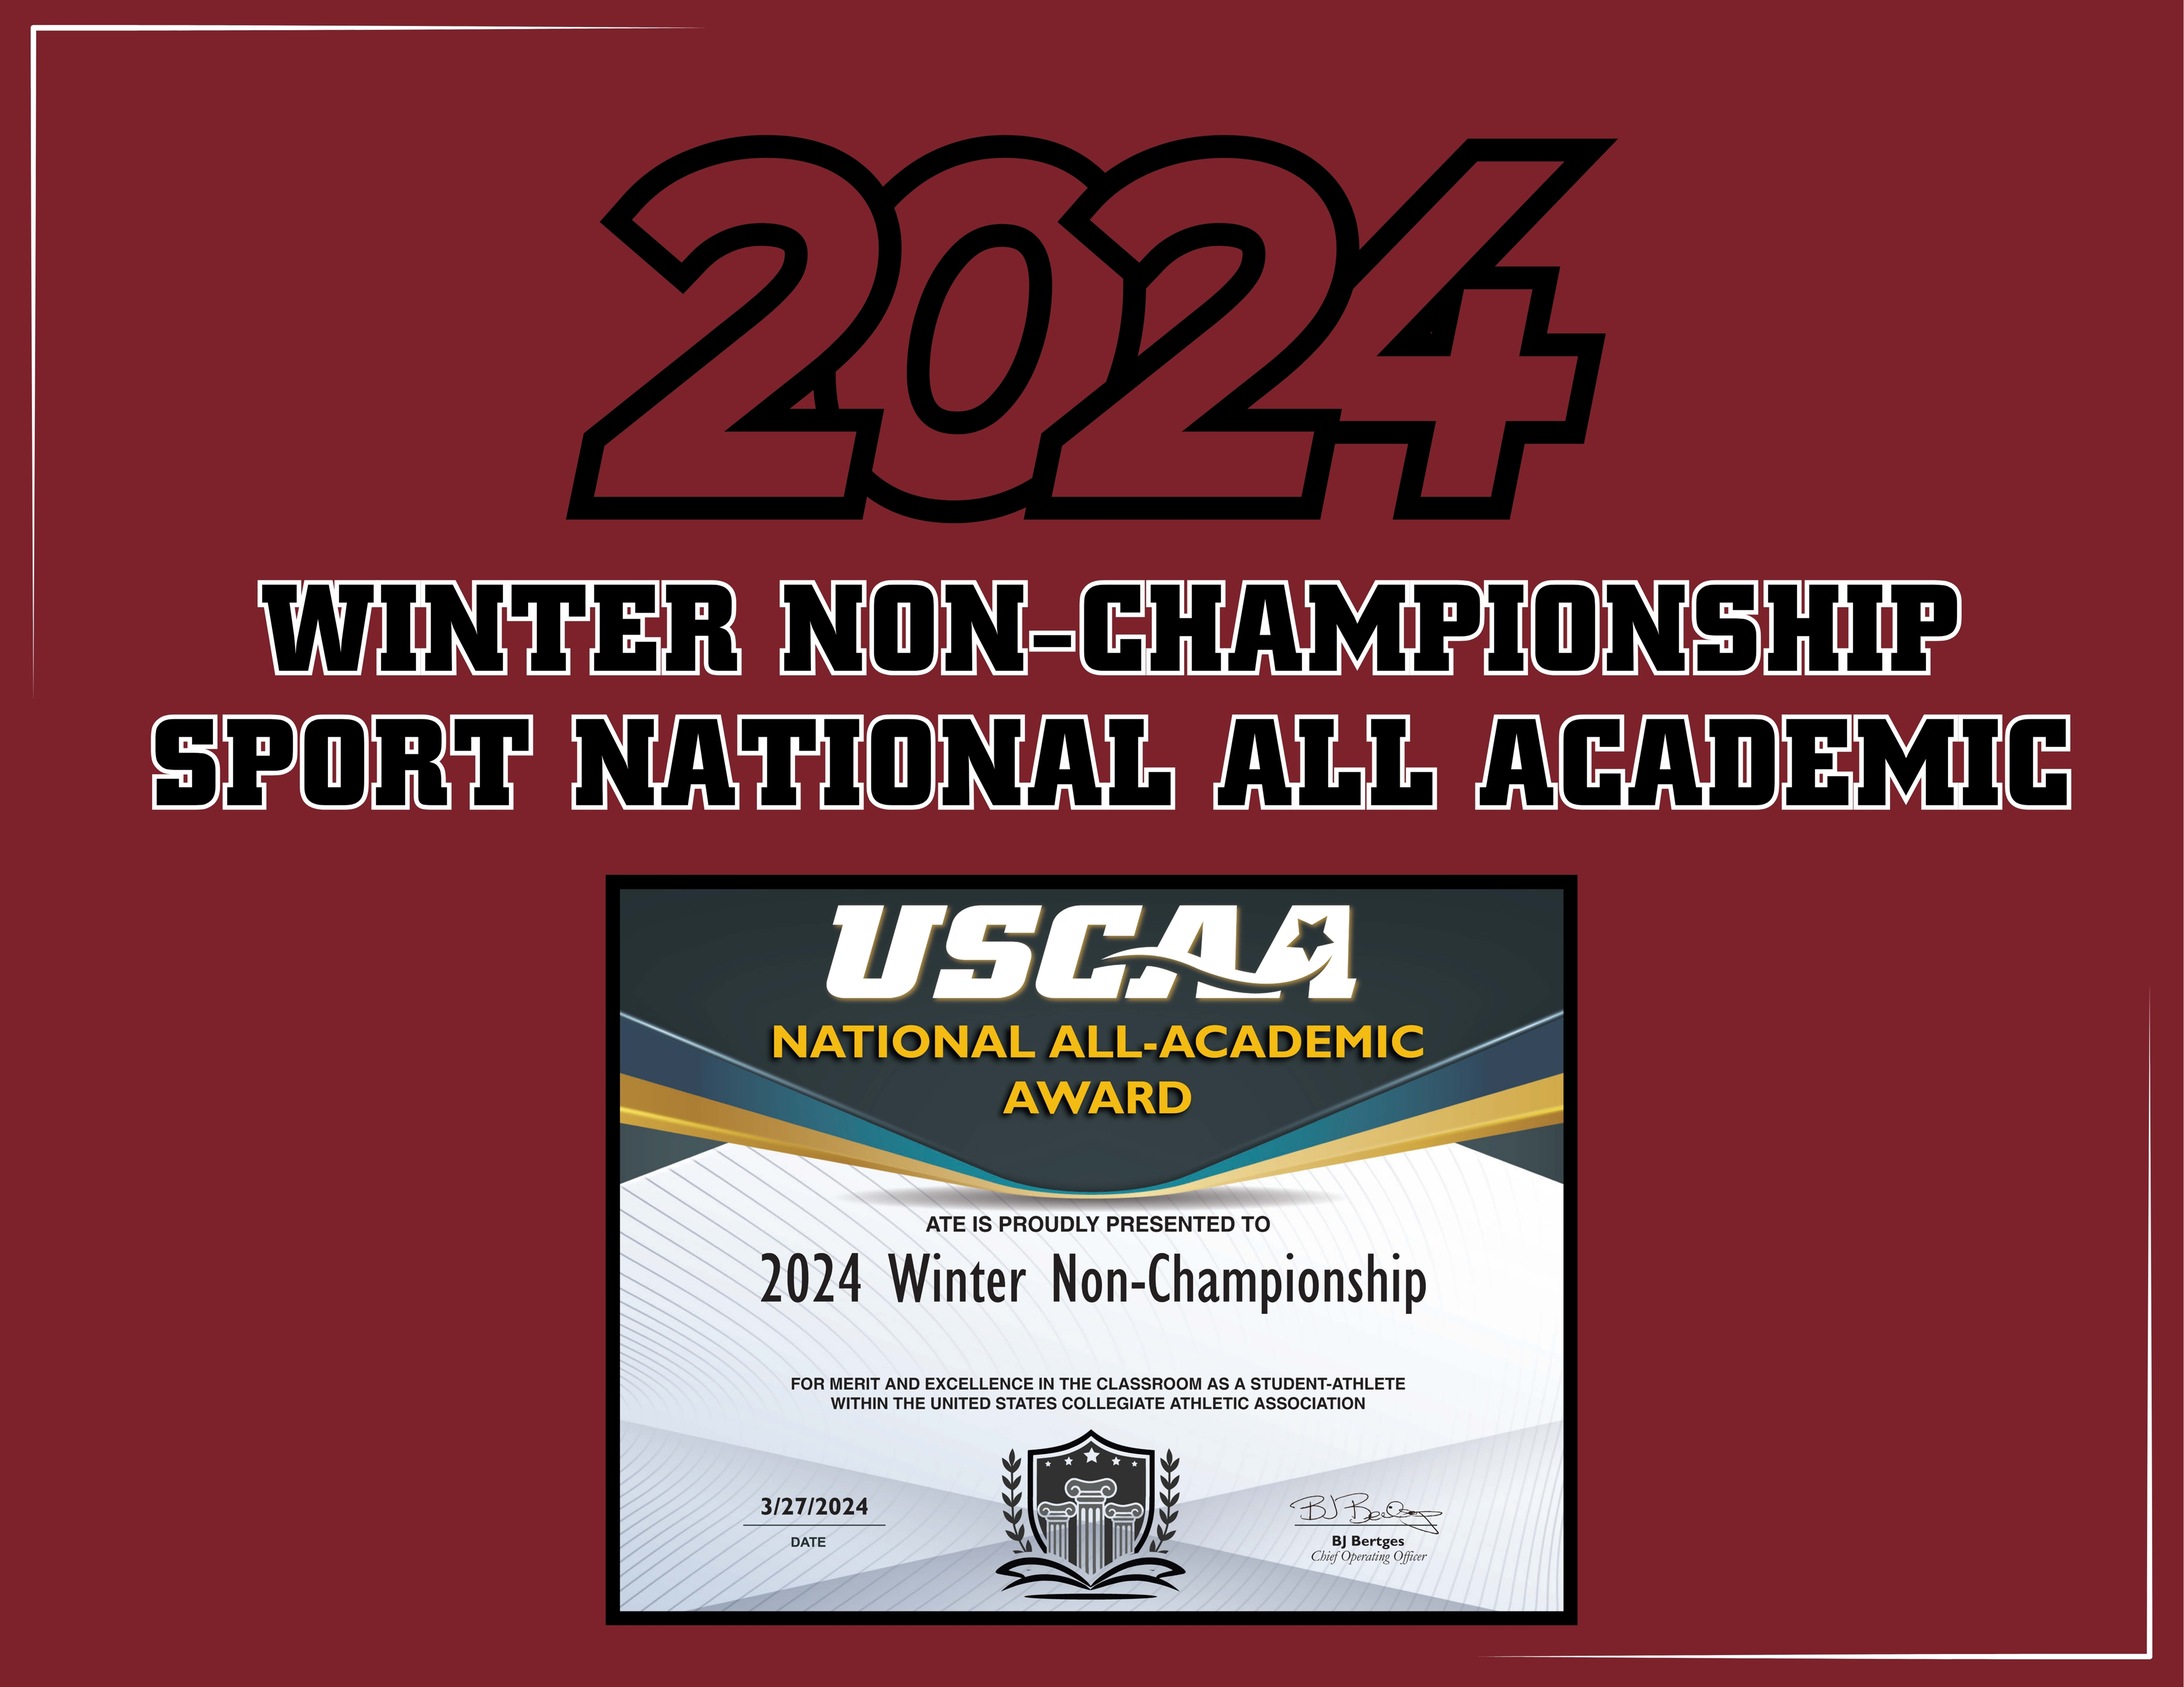 USCAA Announces the 2024 Winter Non-Championship Sport National All-Academic Award Winners